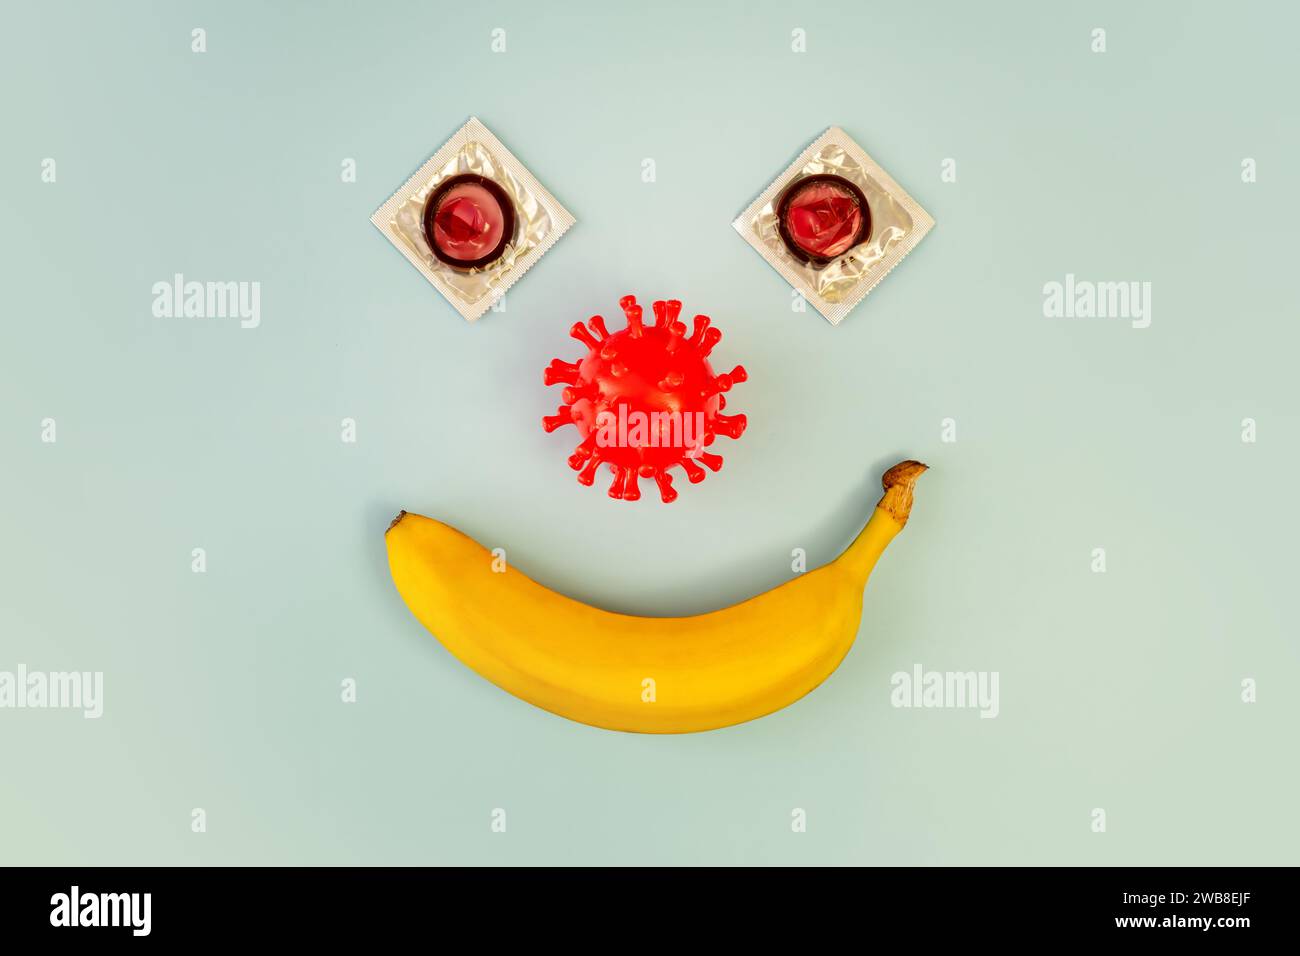 Condom on a banana on a blue background, the concept of protection against sexually transmitted diseases Stock Photo